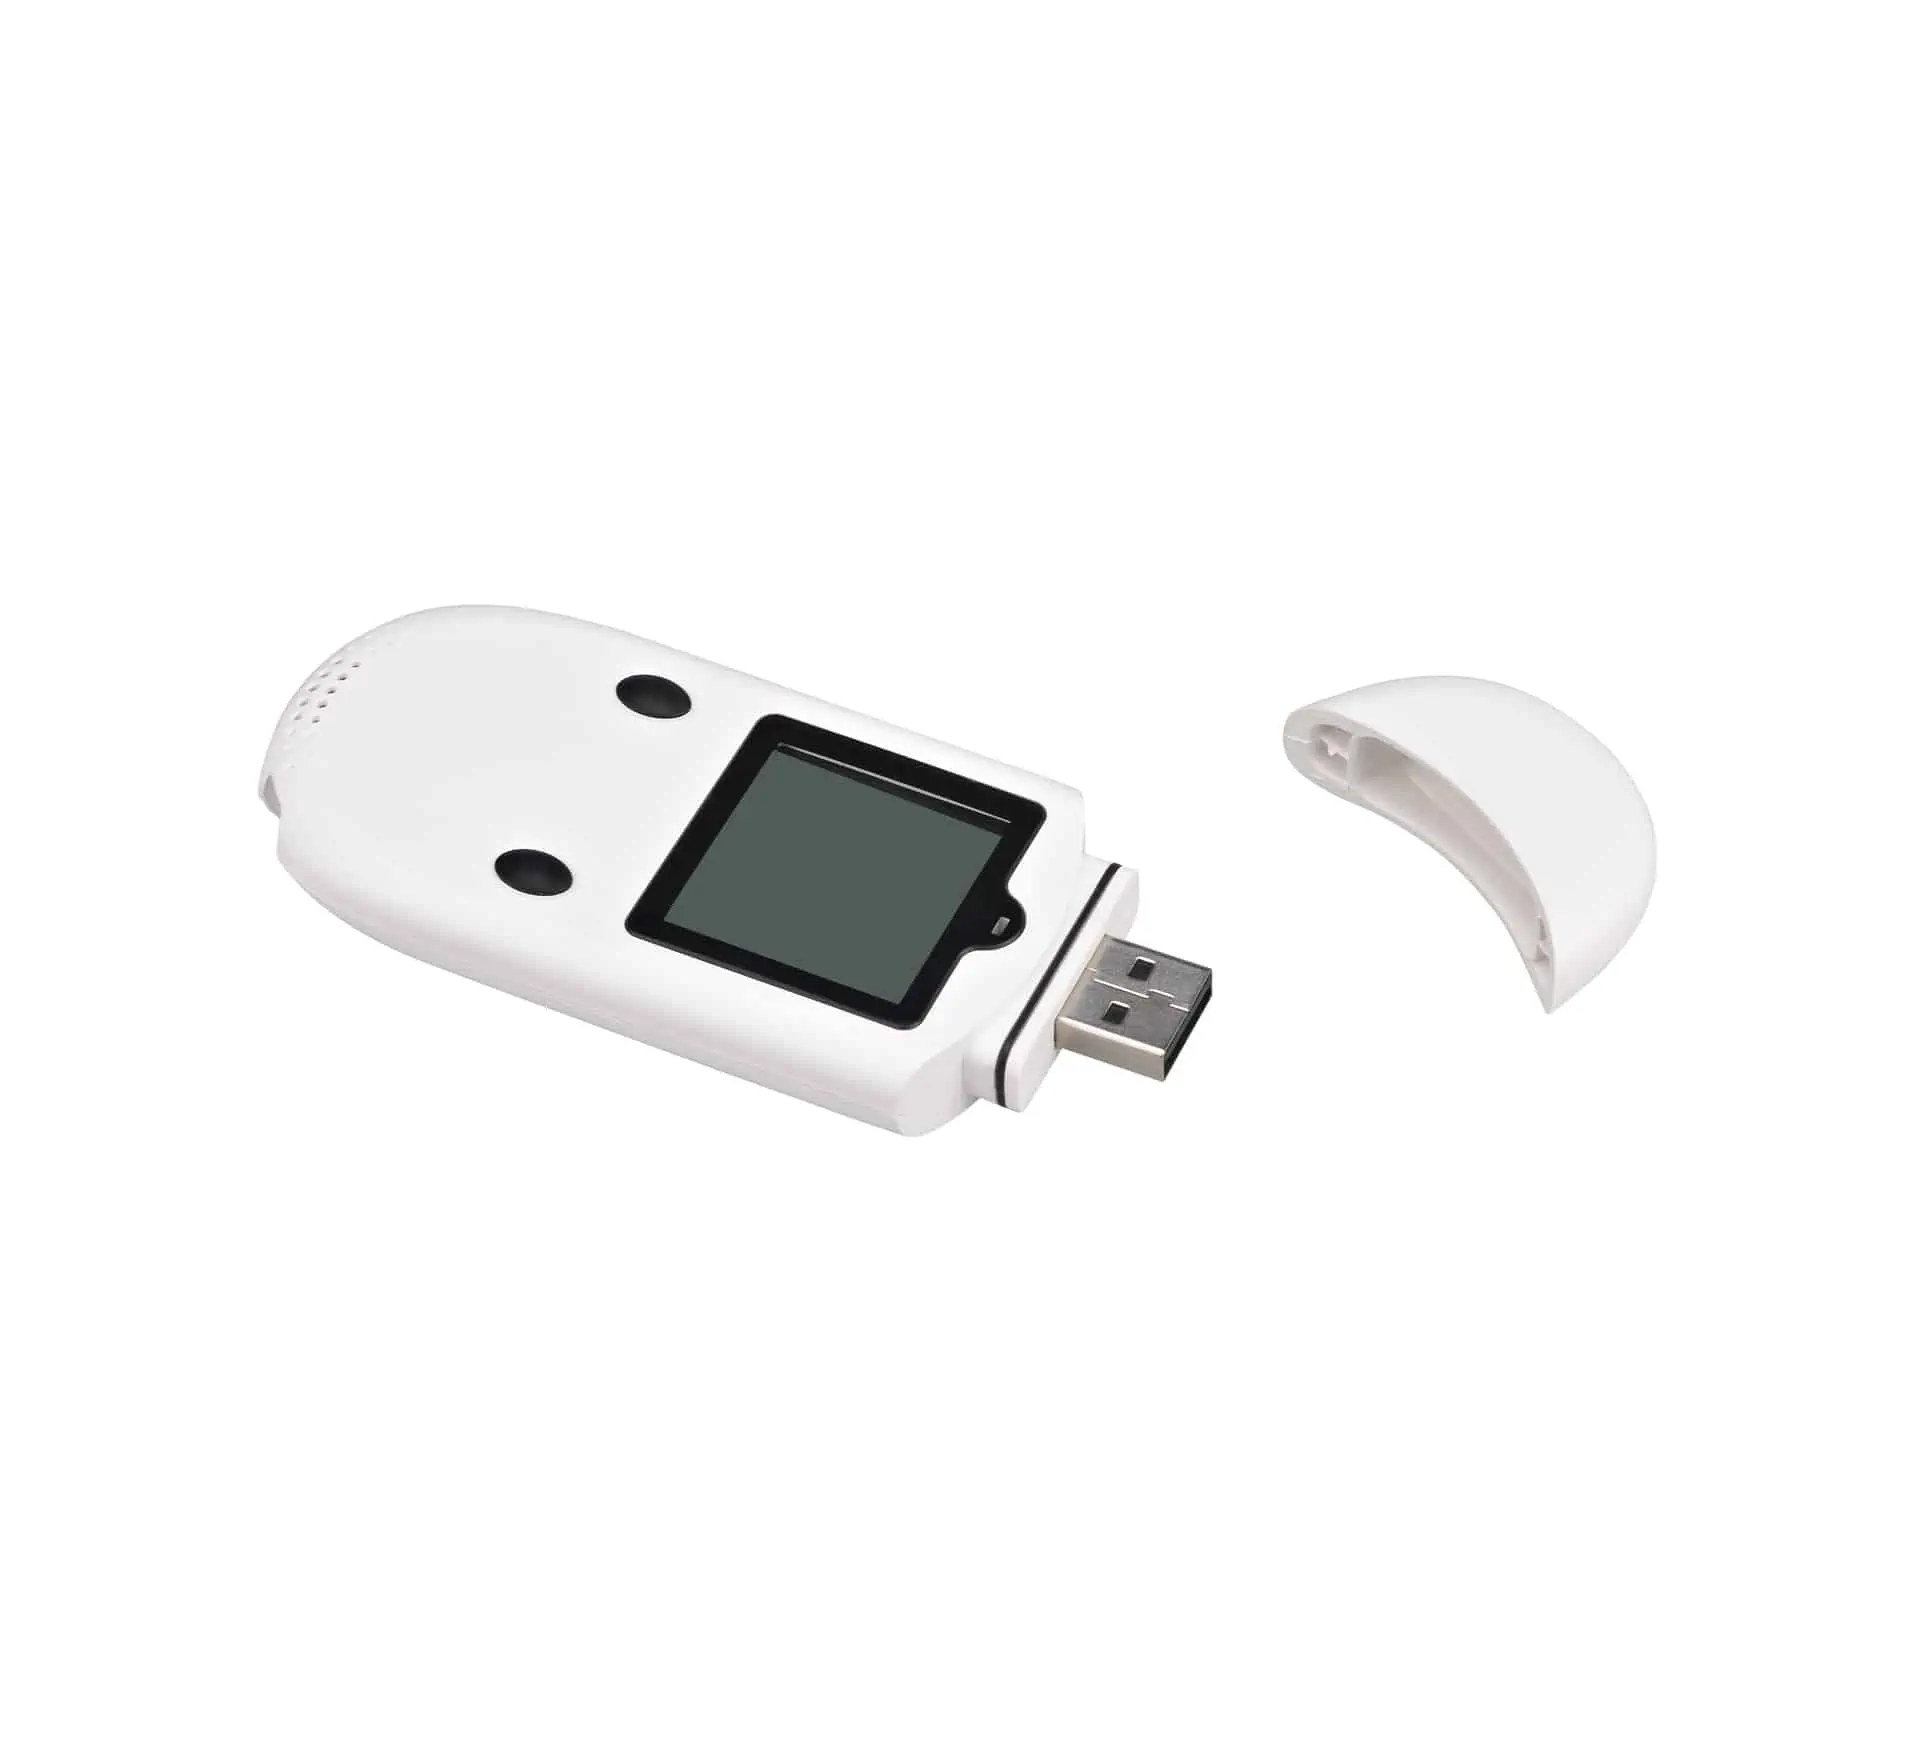 DB01 BLE BLUETOOTH TEMPERATURE & HUMIDITY TRACKING SENSOR TAGS FOR VALUABLE ASSETS